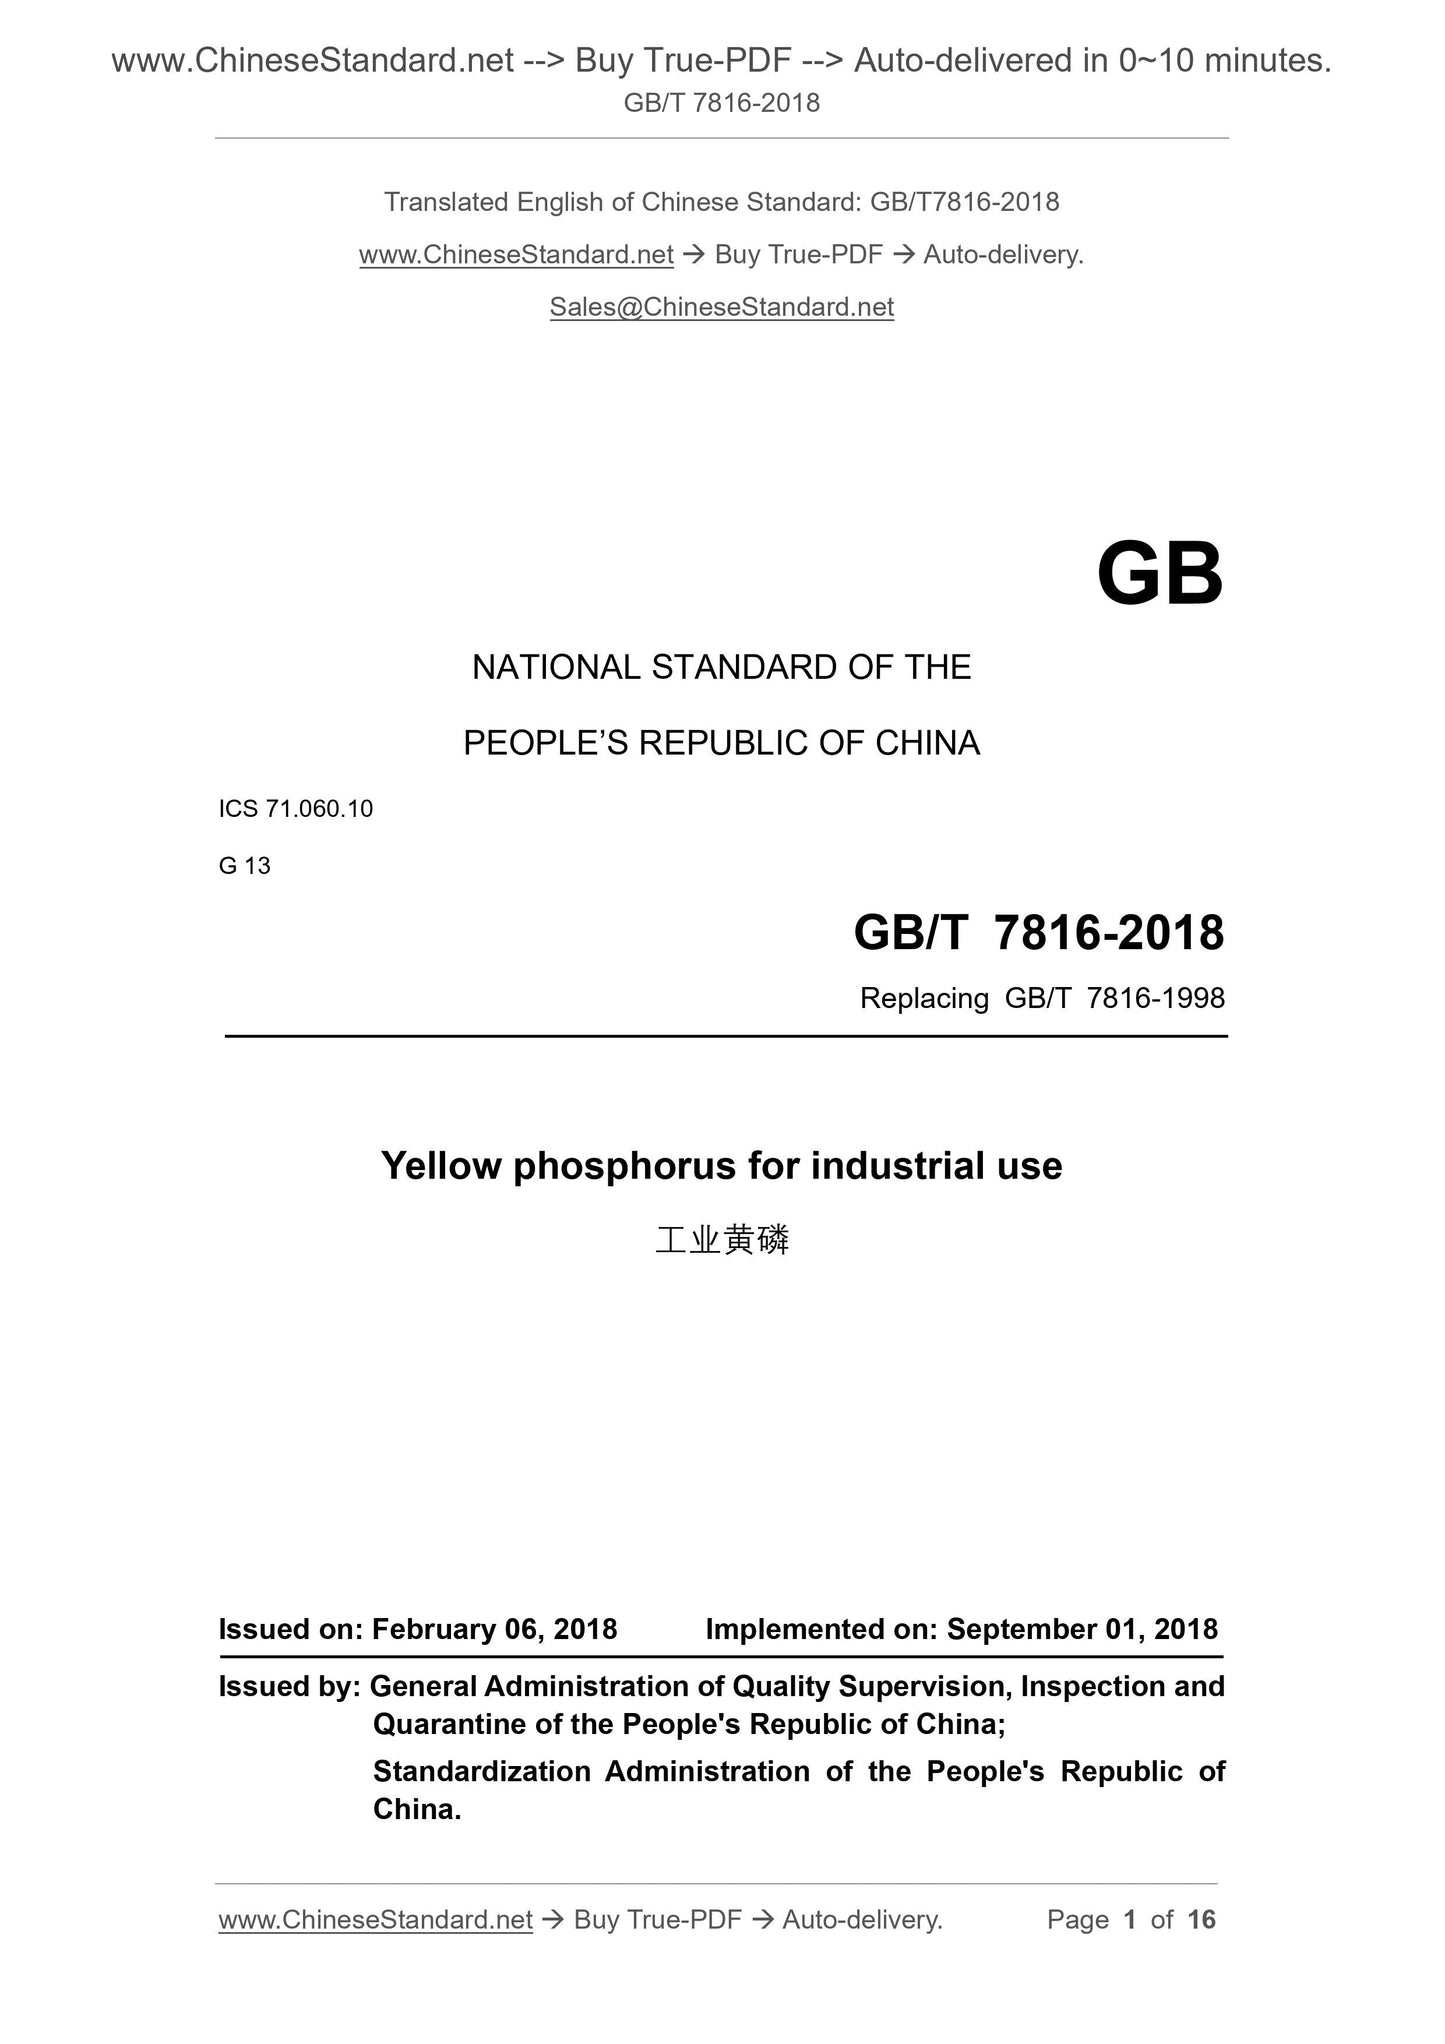 GB/T 7816-2018 Page 1